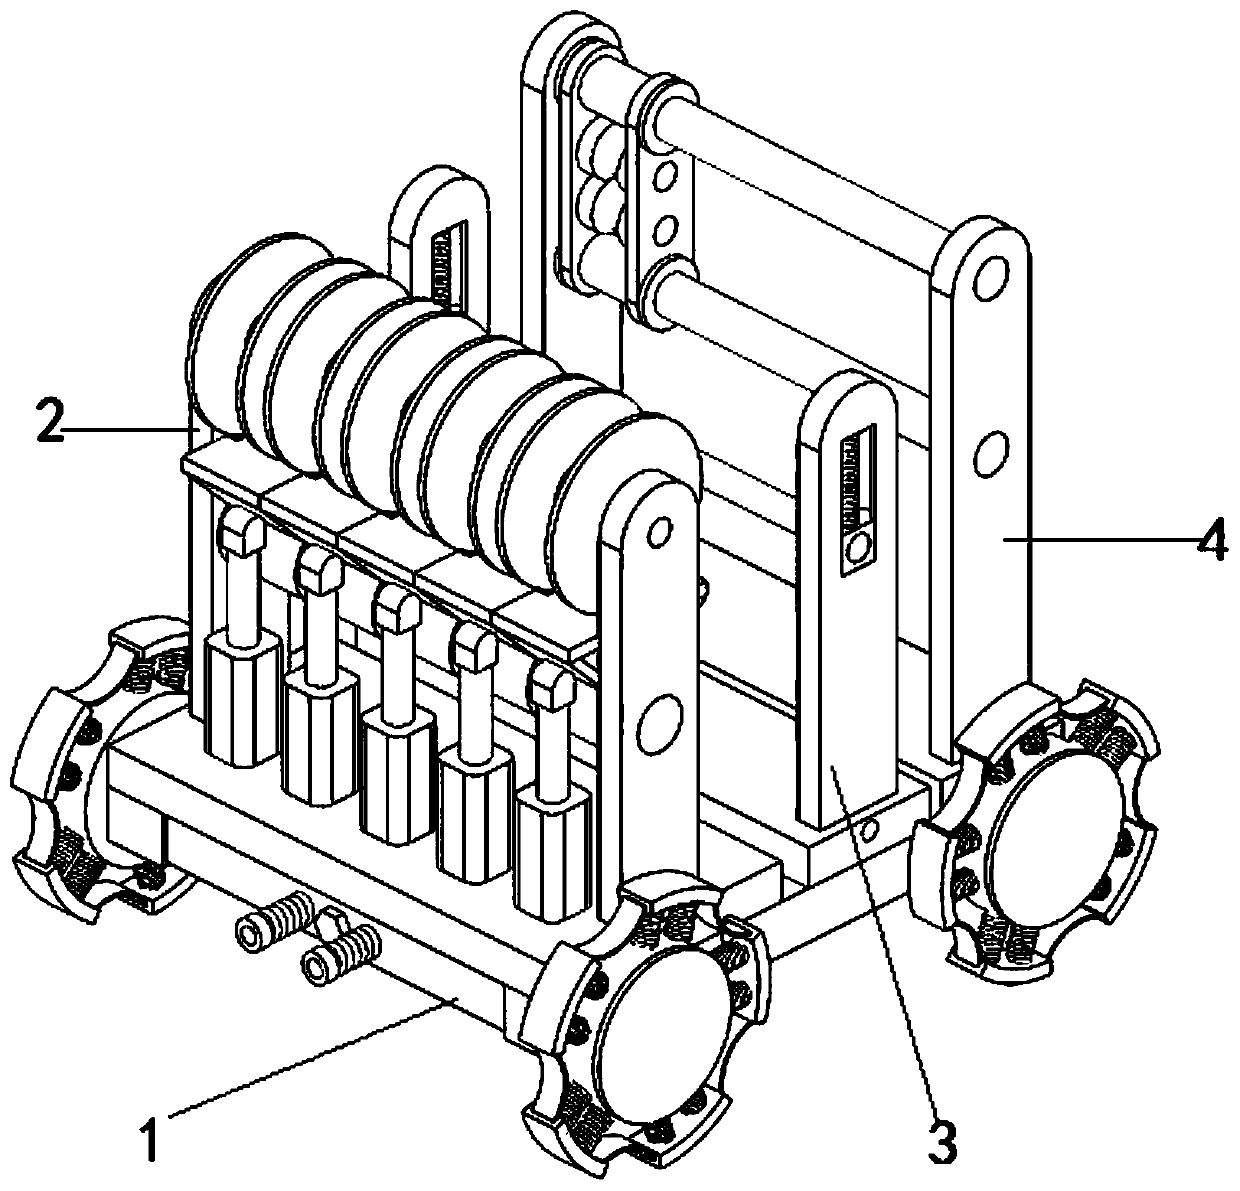 Cable winding and unwinding adjusting mechanism